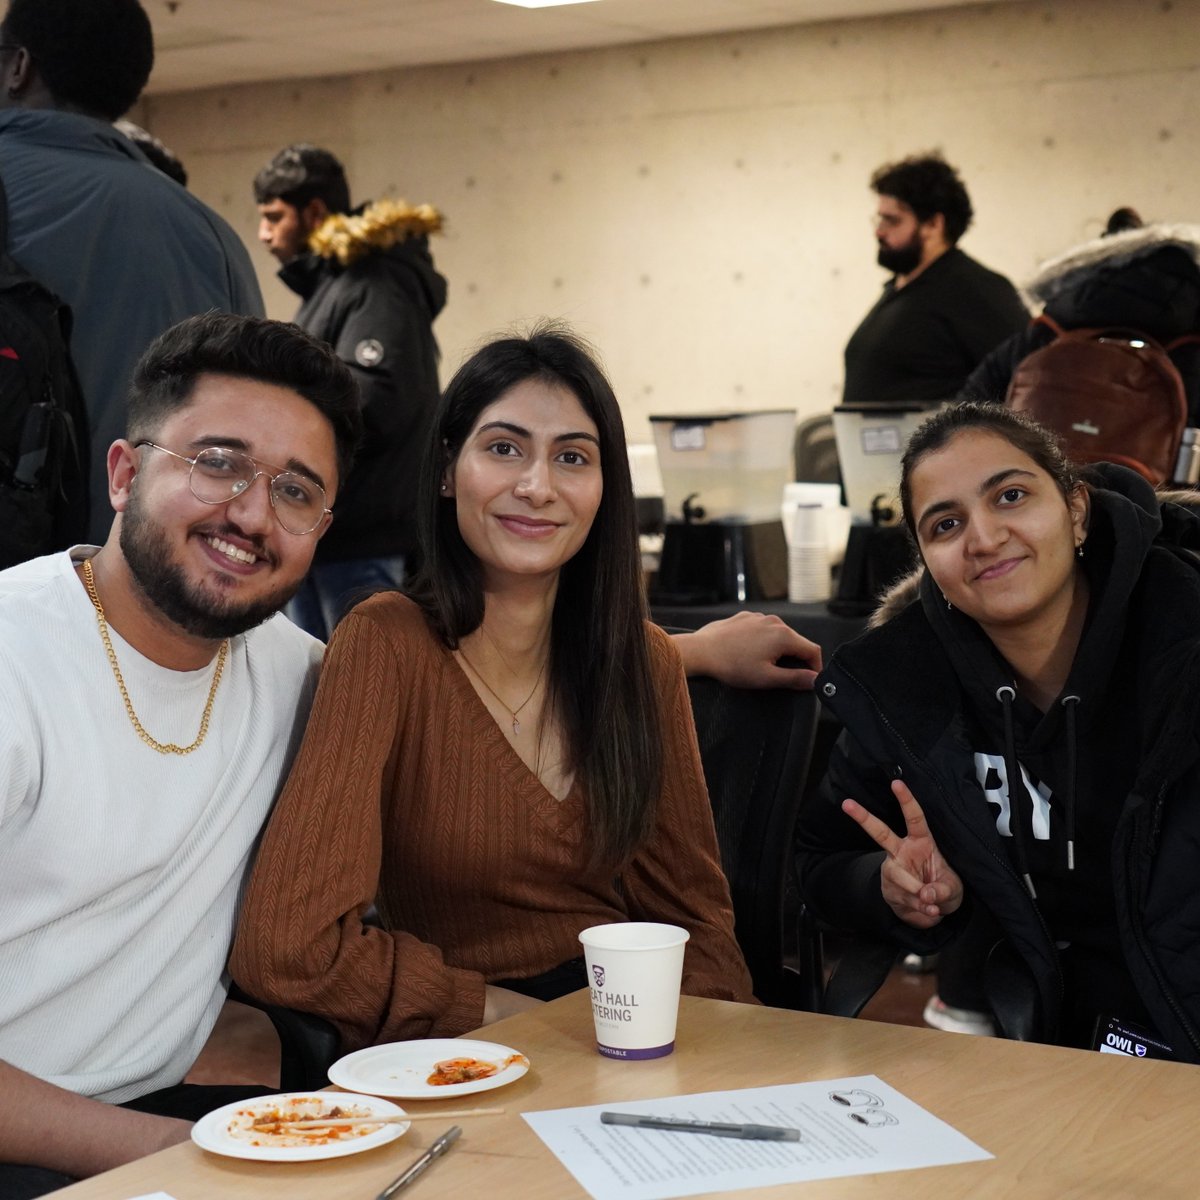 Global Café is back with fun games, activities and free refreshments! Come join us on May 9 from 3 to 5 p m in the International and Graduate Affairs Building (IGAB) Atrium to welcome new students and connect with people from all over the world. @westernuse @westernsogs